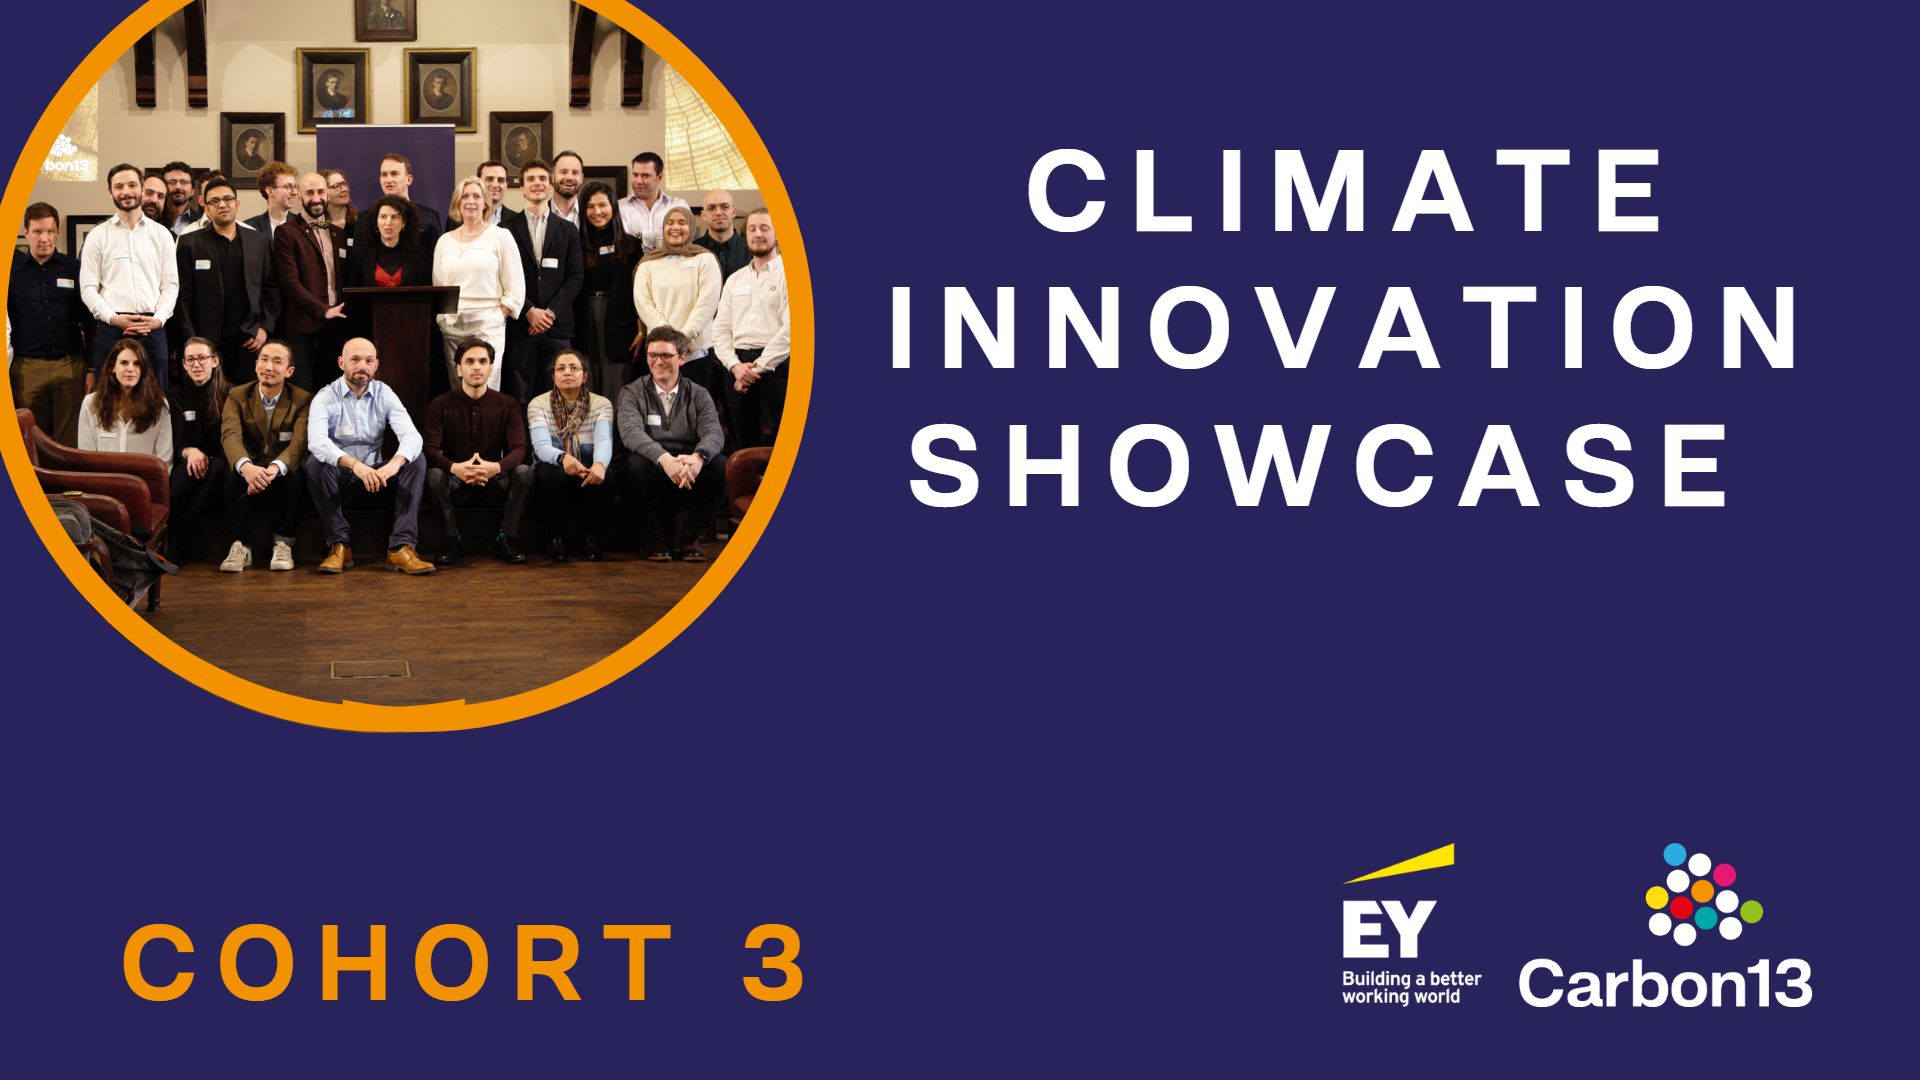 Blue image with a picture of Cohort 4 of the Venture Builder in the corner. The text: Climate innovation showcase, cohort 3 is visible